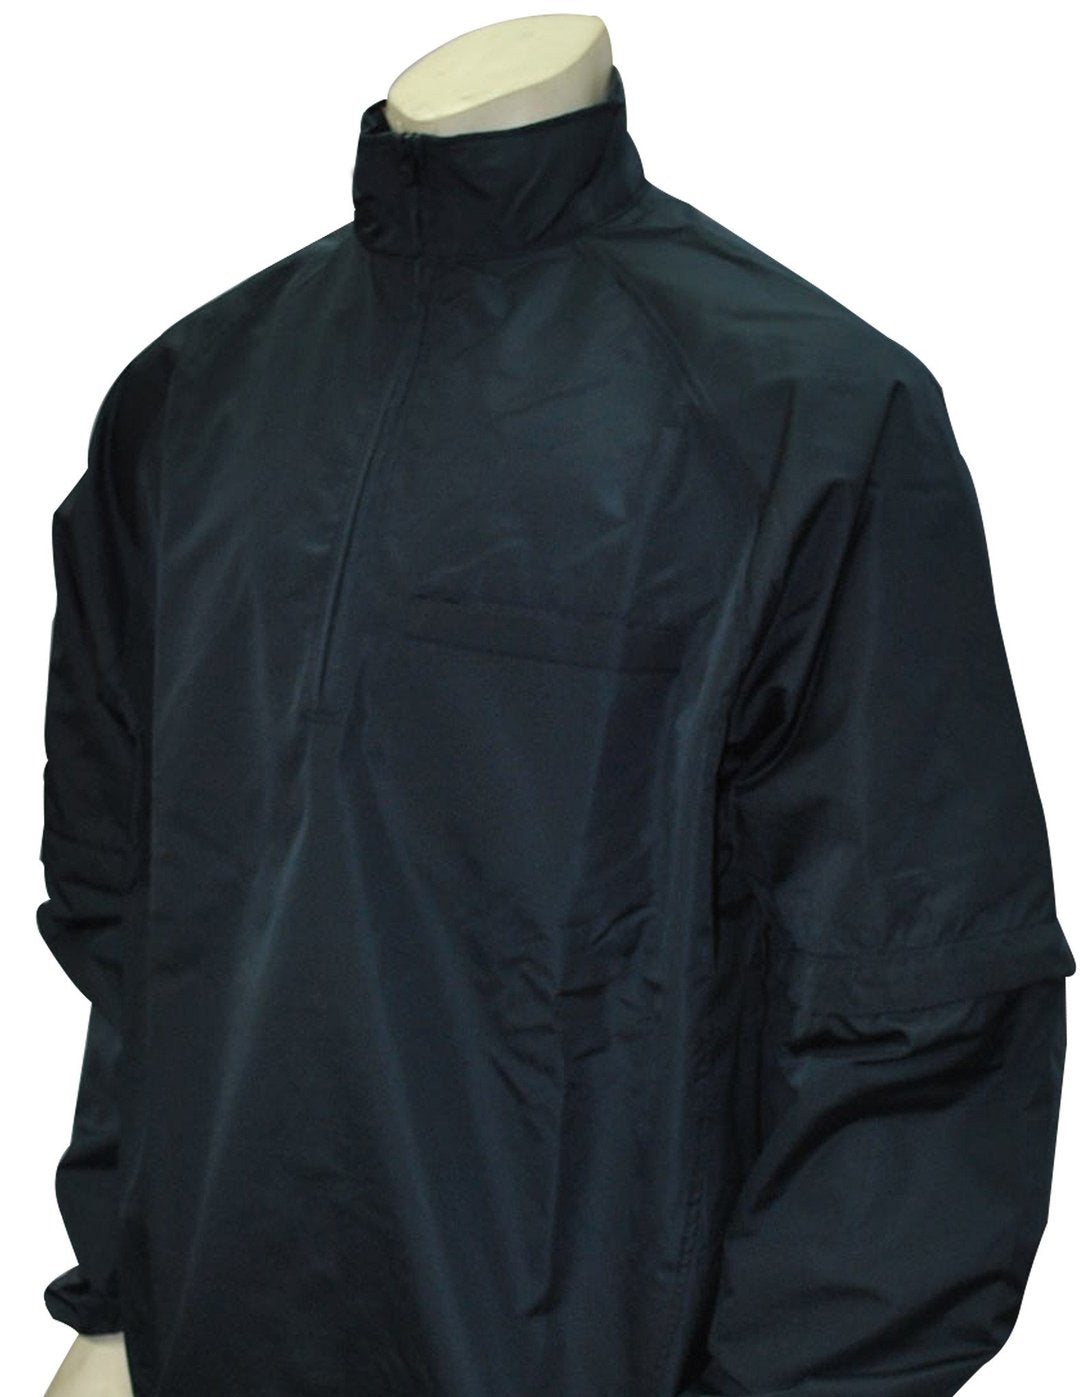 BBS-326 Major League Style Lightweight Convertible Sleeve Jacket - Available in Black and Navy